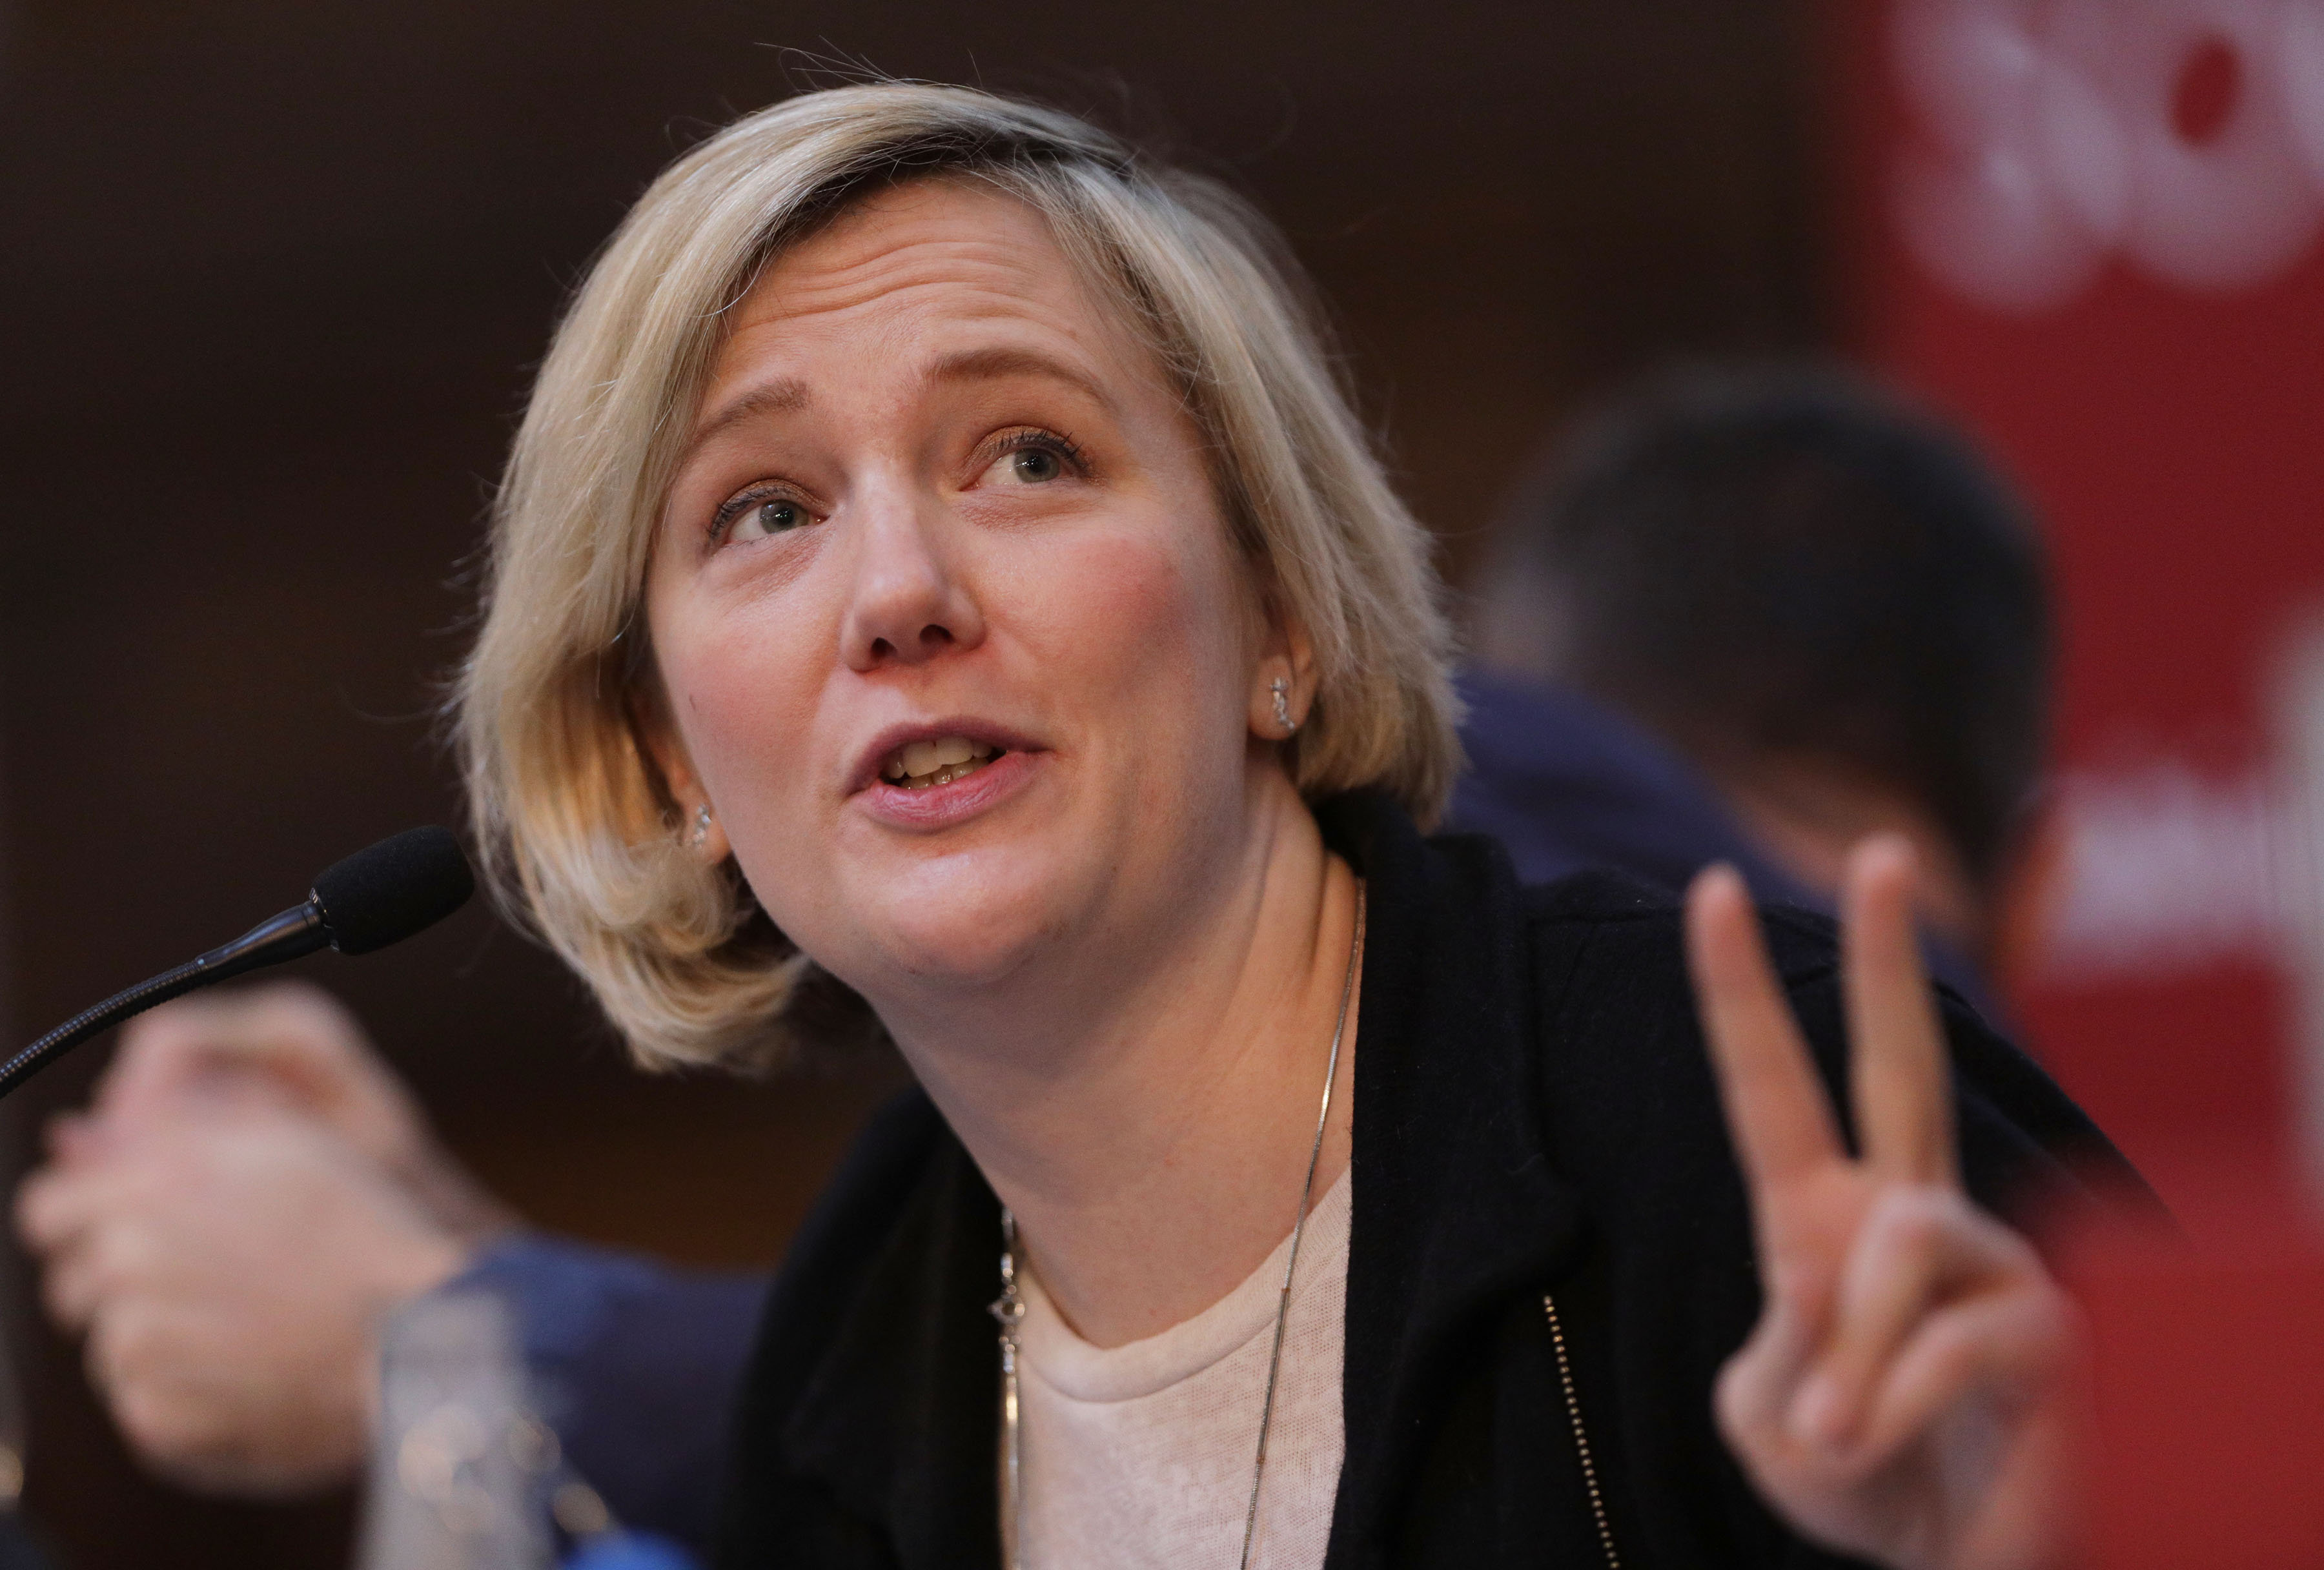 Stella Creasy said there must be a change in attitudes to help the next generation.